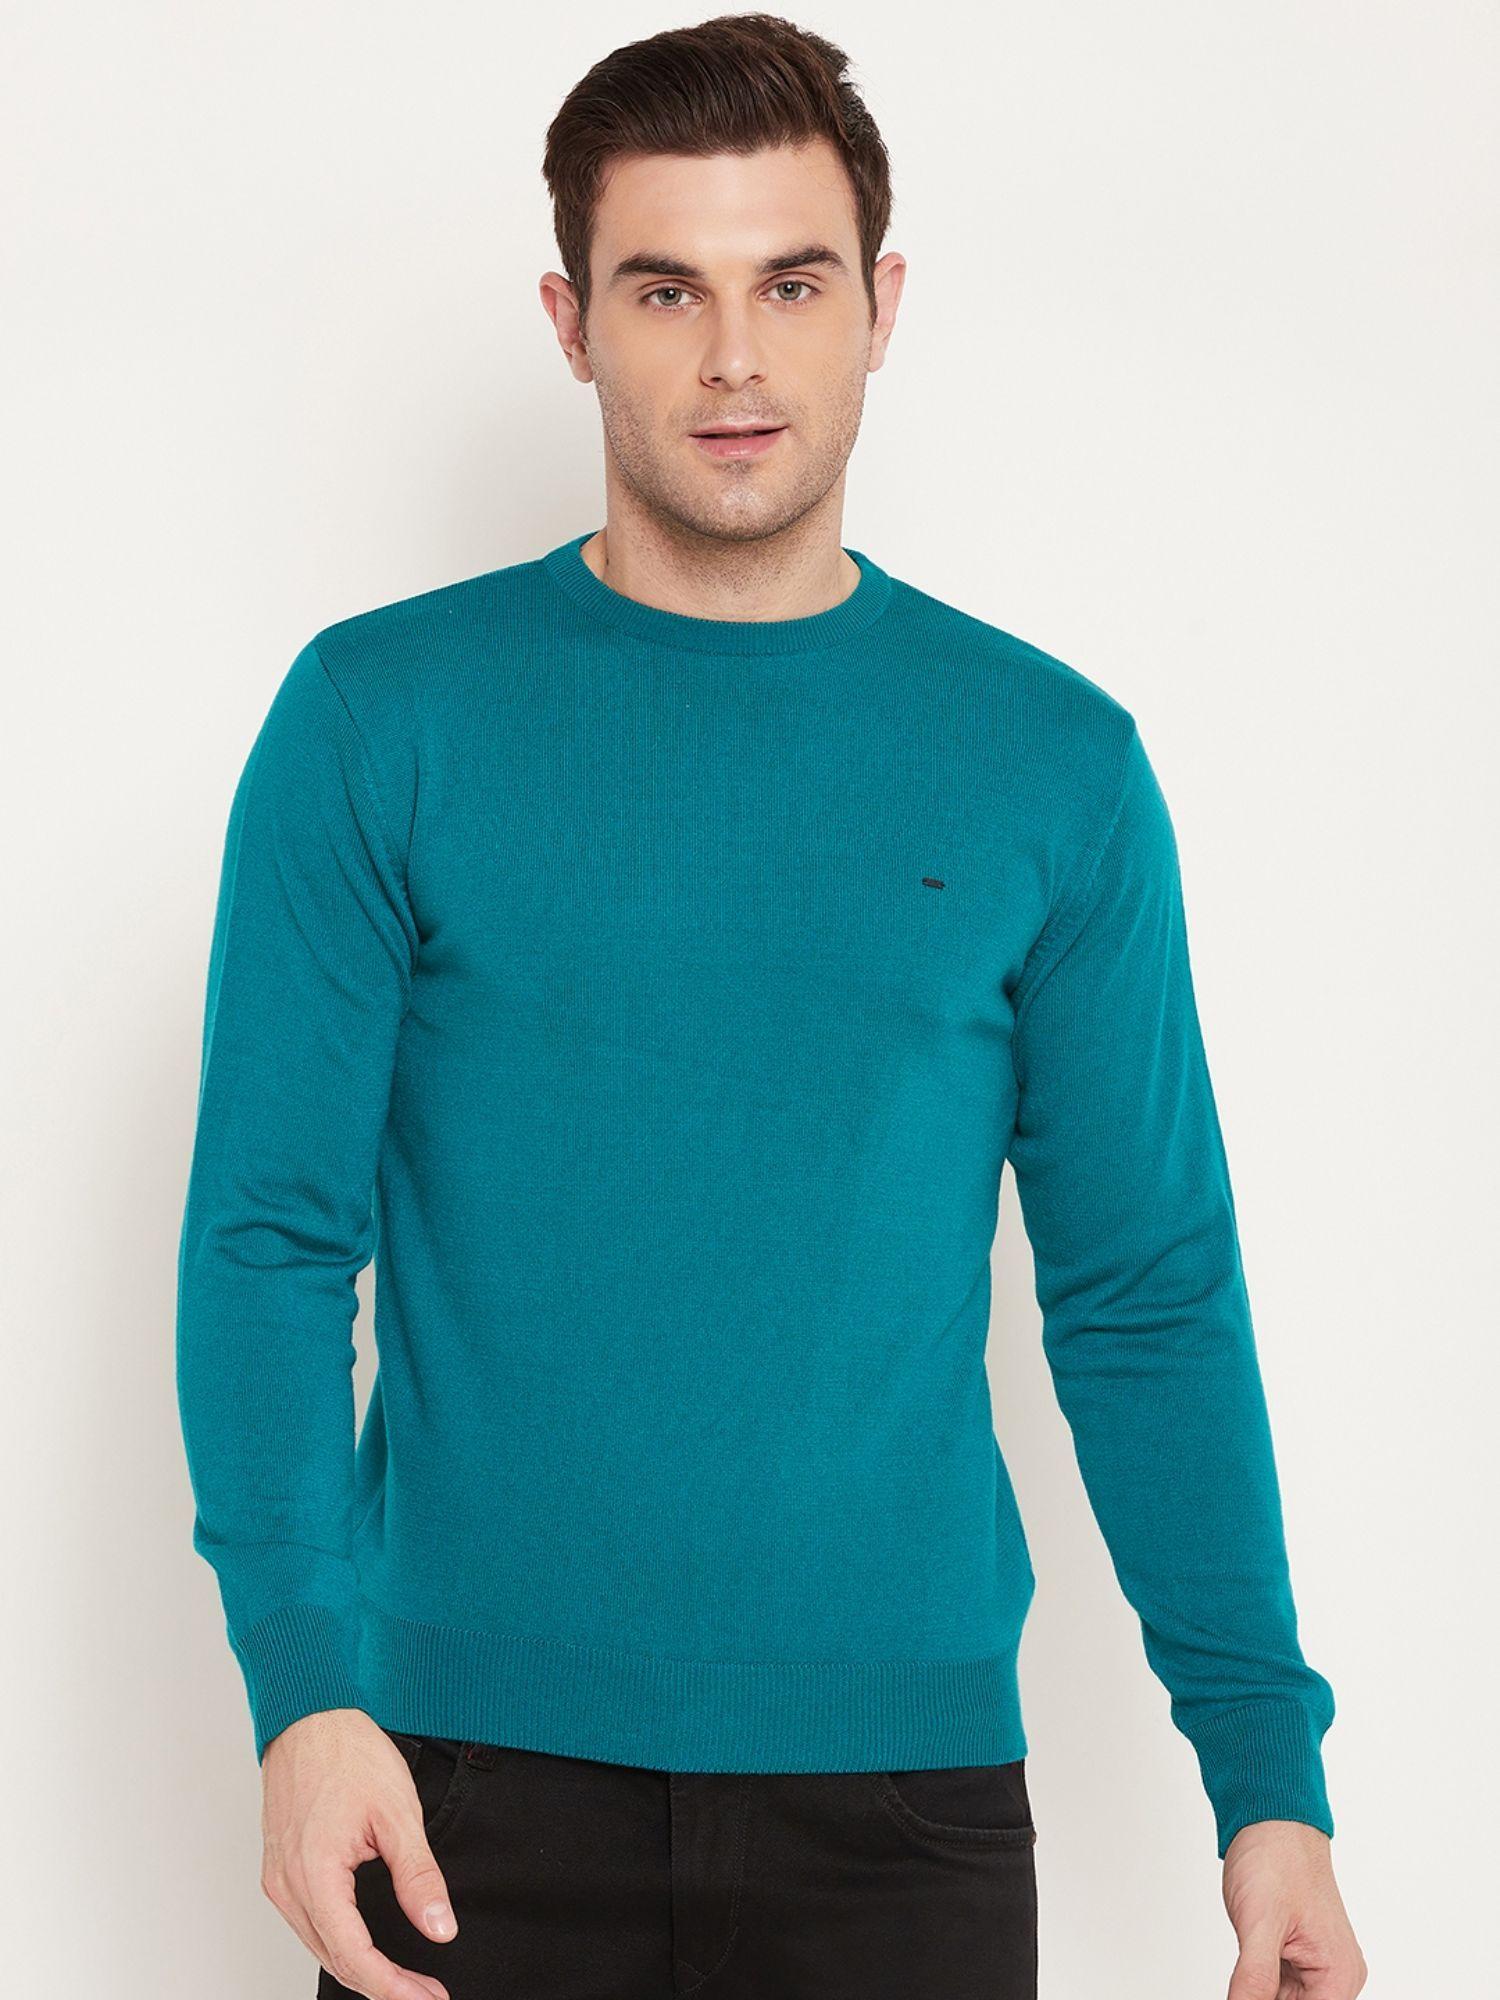 mens turquoise round neck sweaters